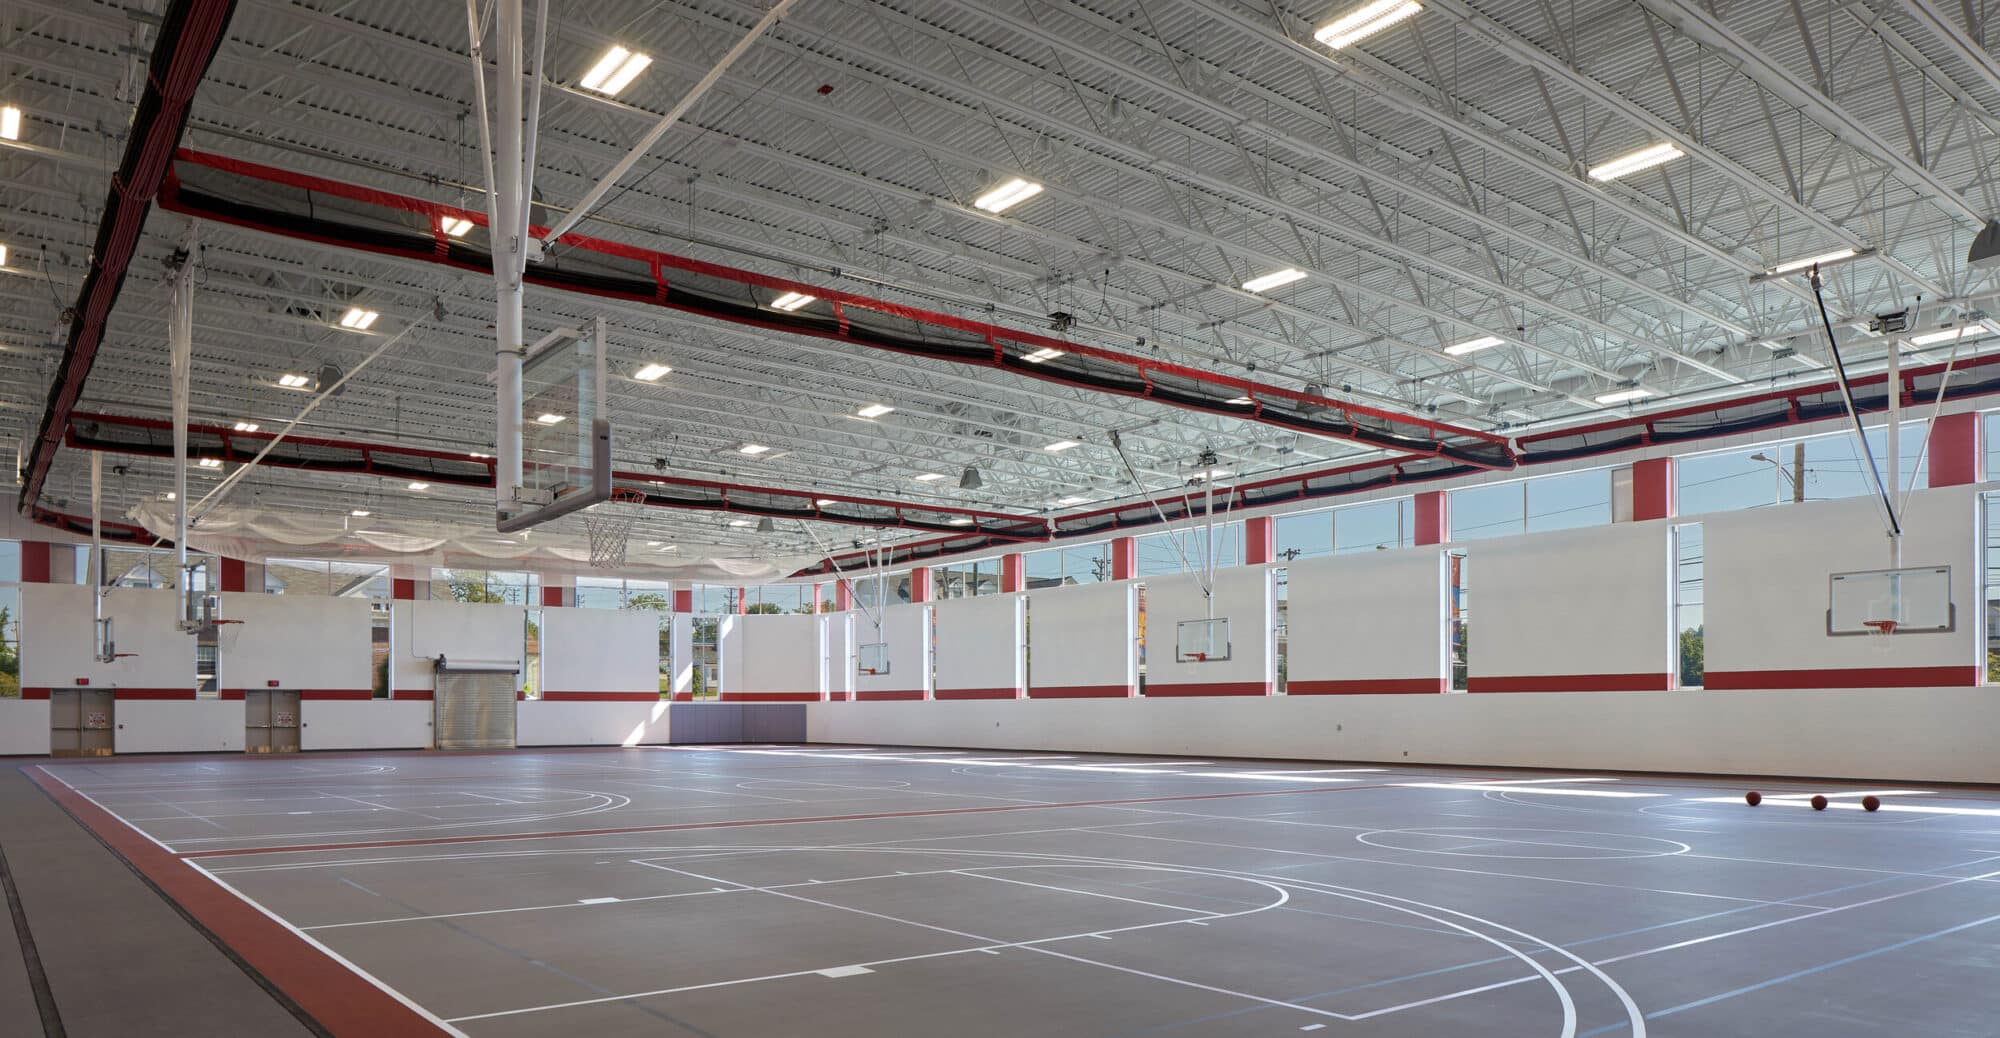 Indoor basketball court with multiple hoops and markings.